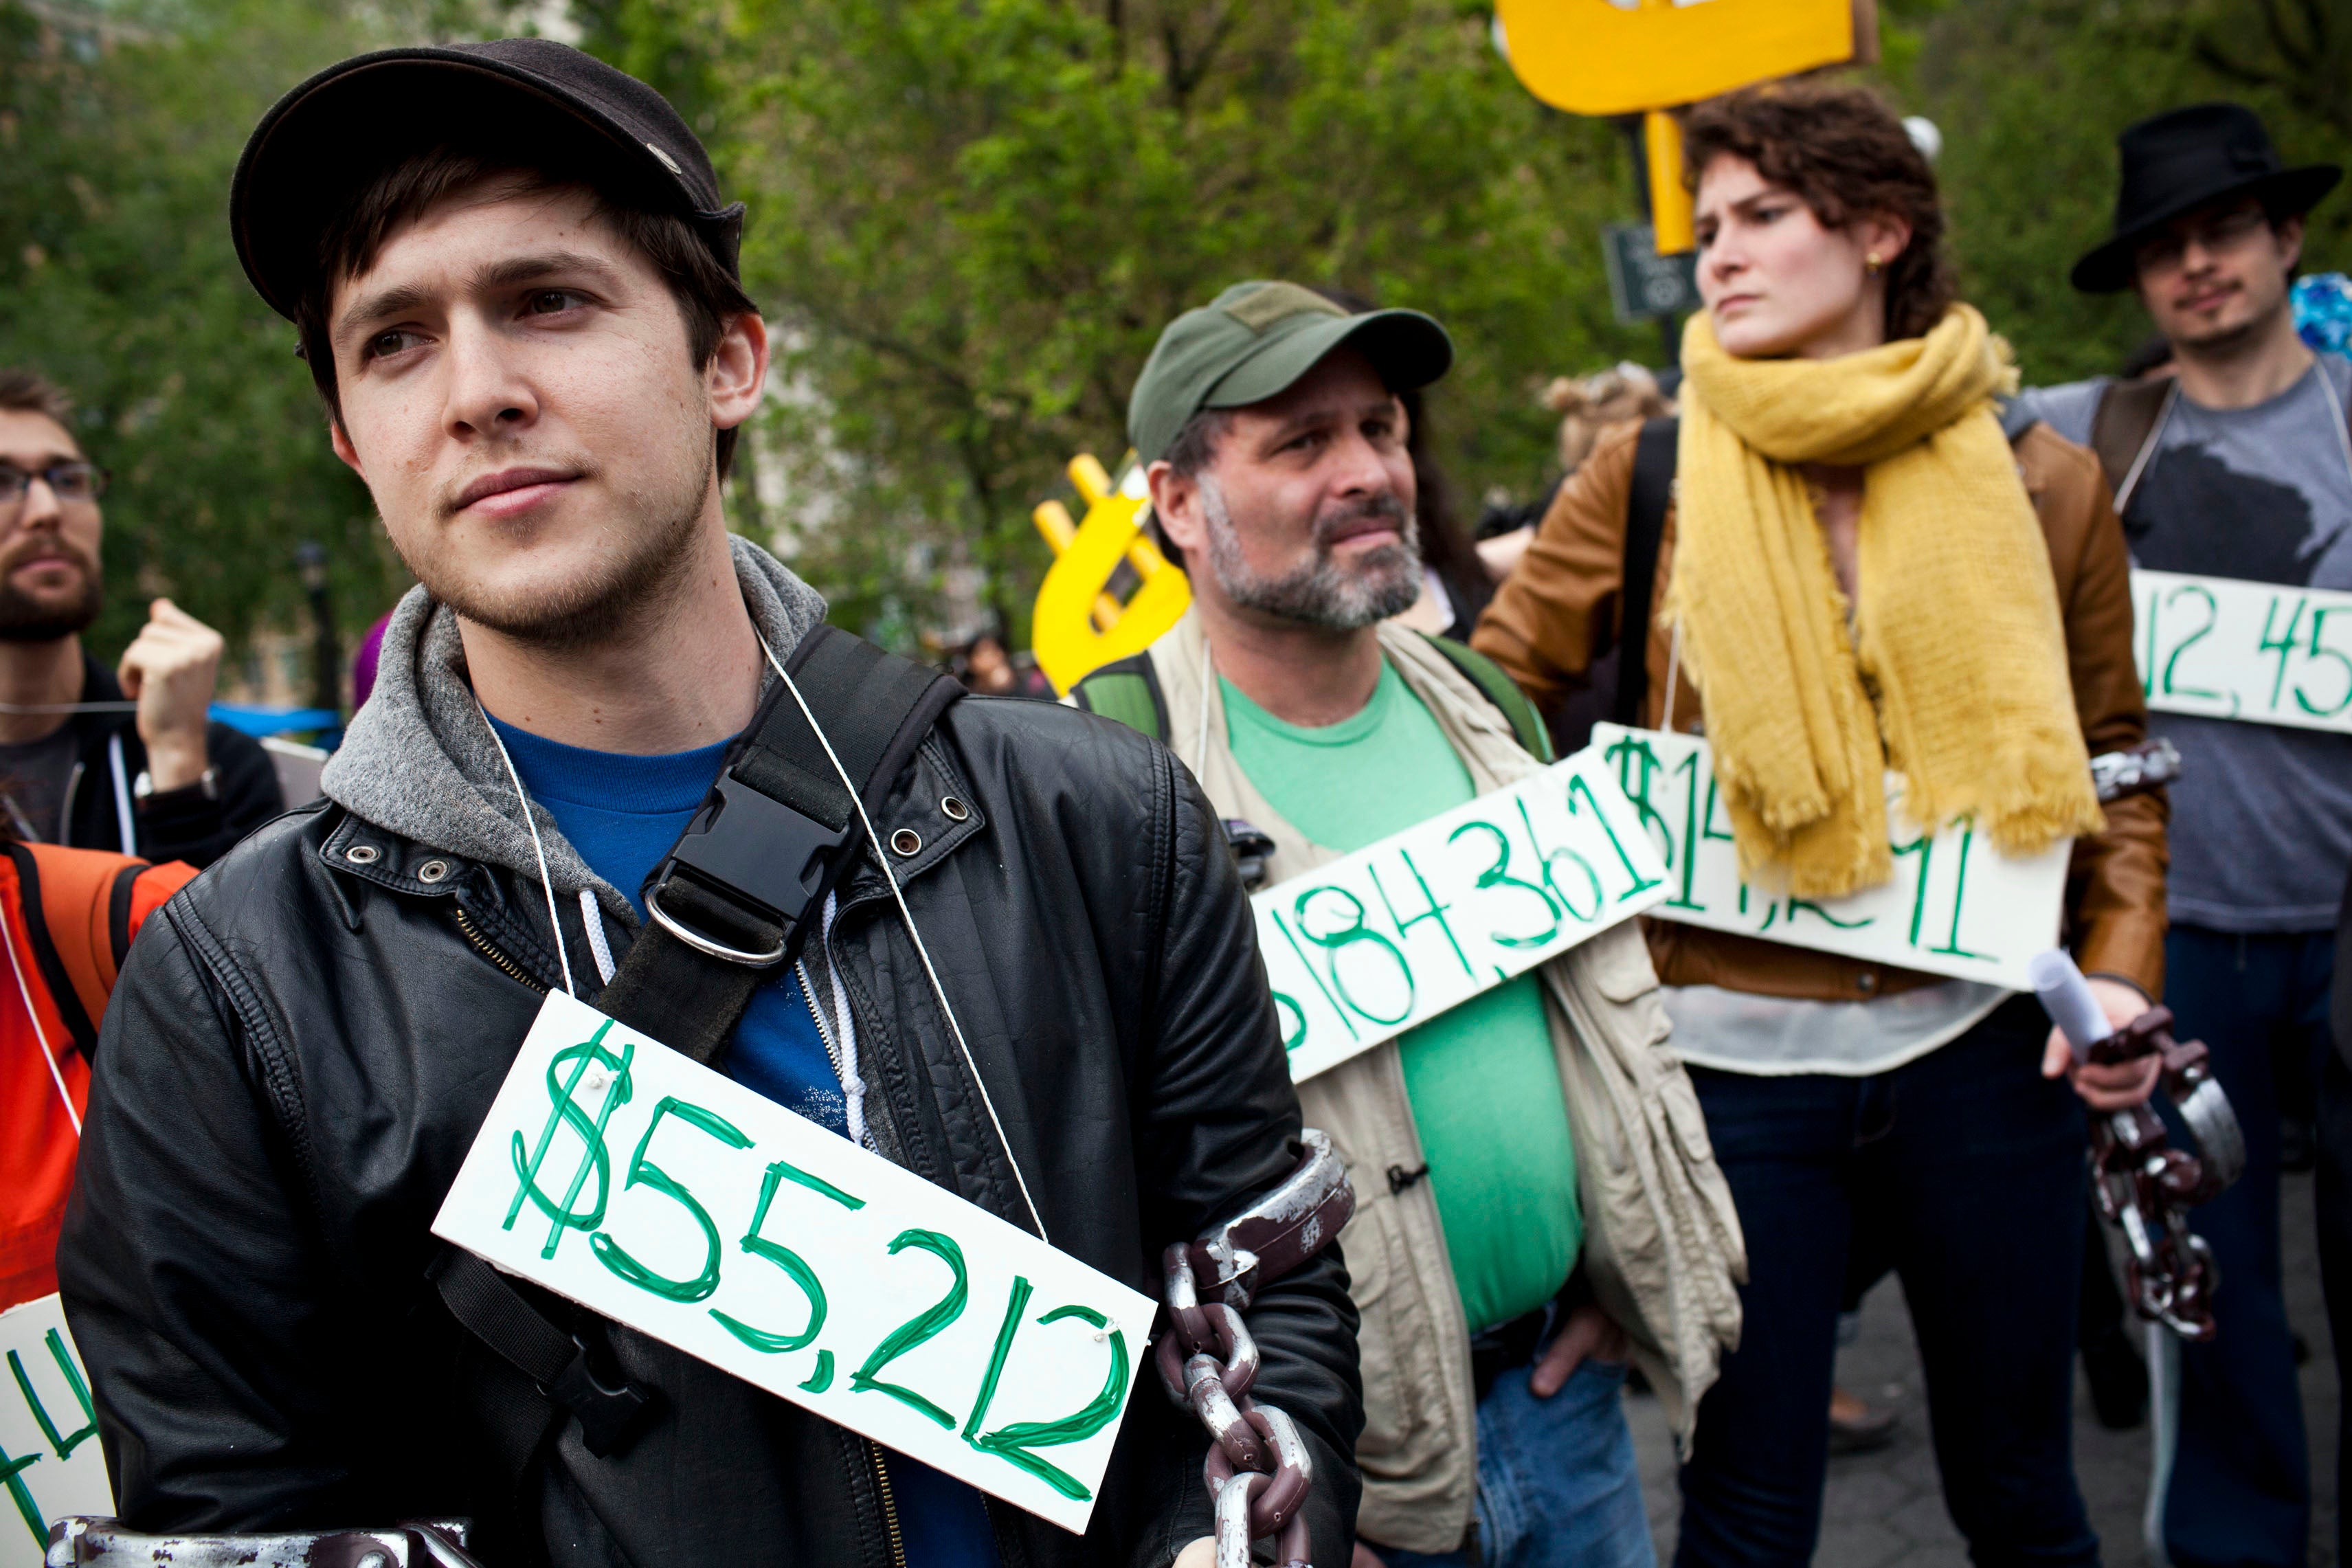 Occupy Wall Street protesters demonstrate over student debt.